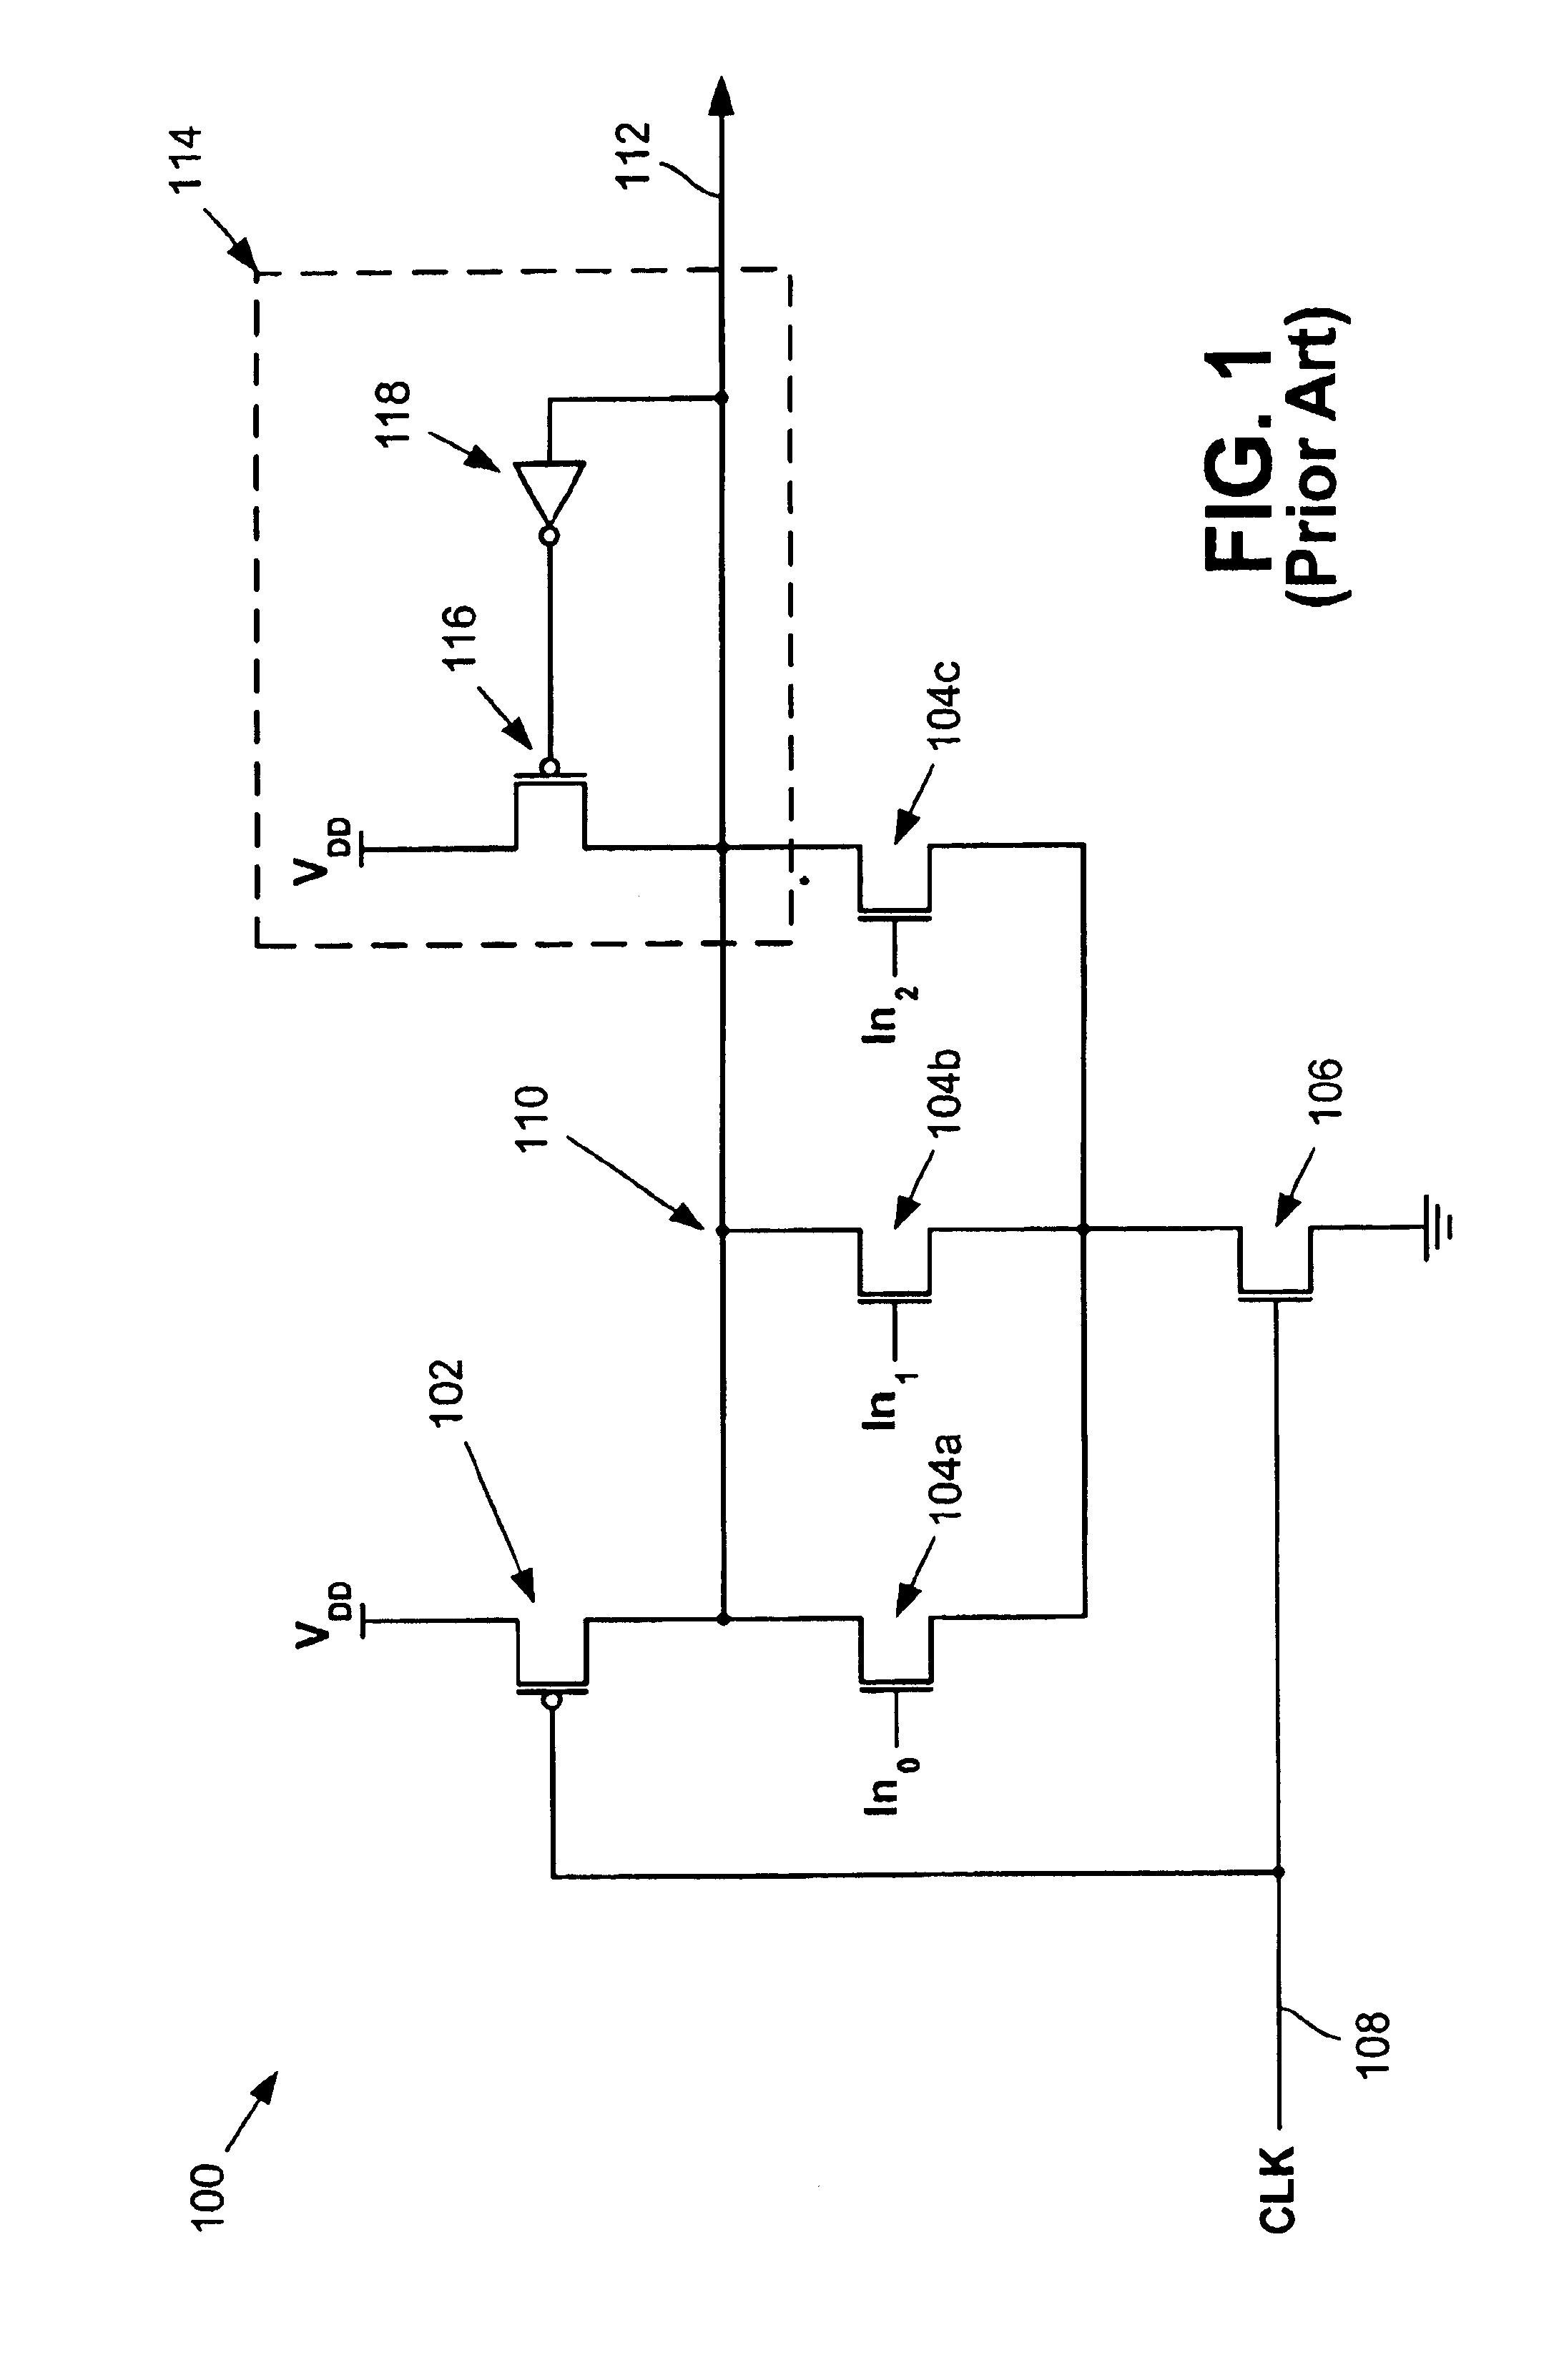 Process monitor based keeper scheme for dynamic circuits